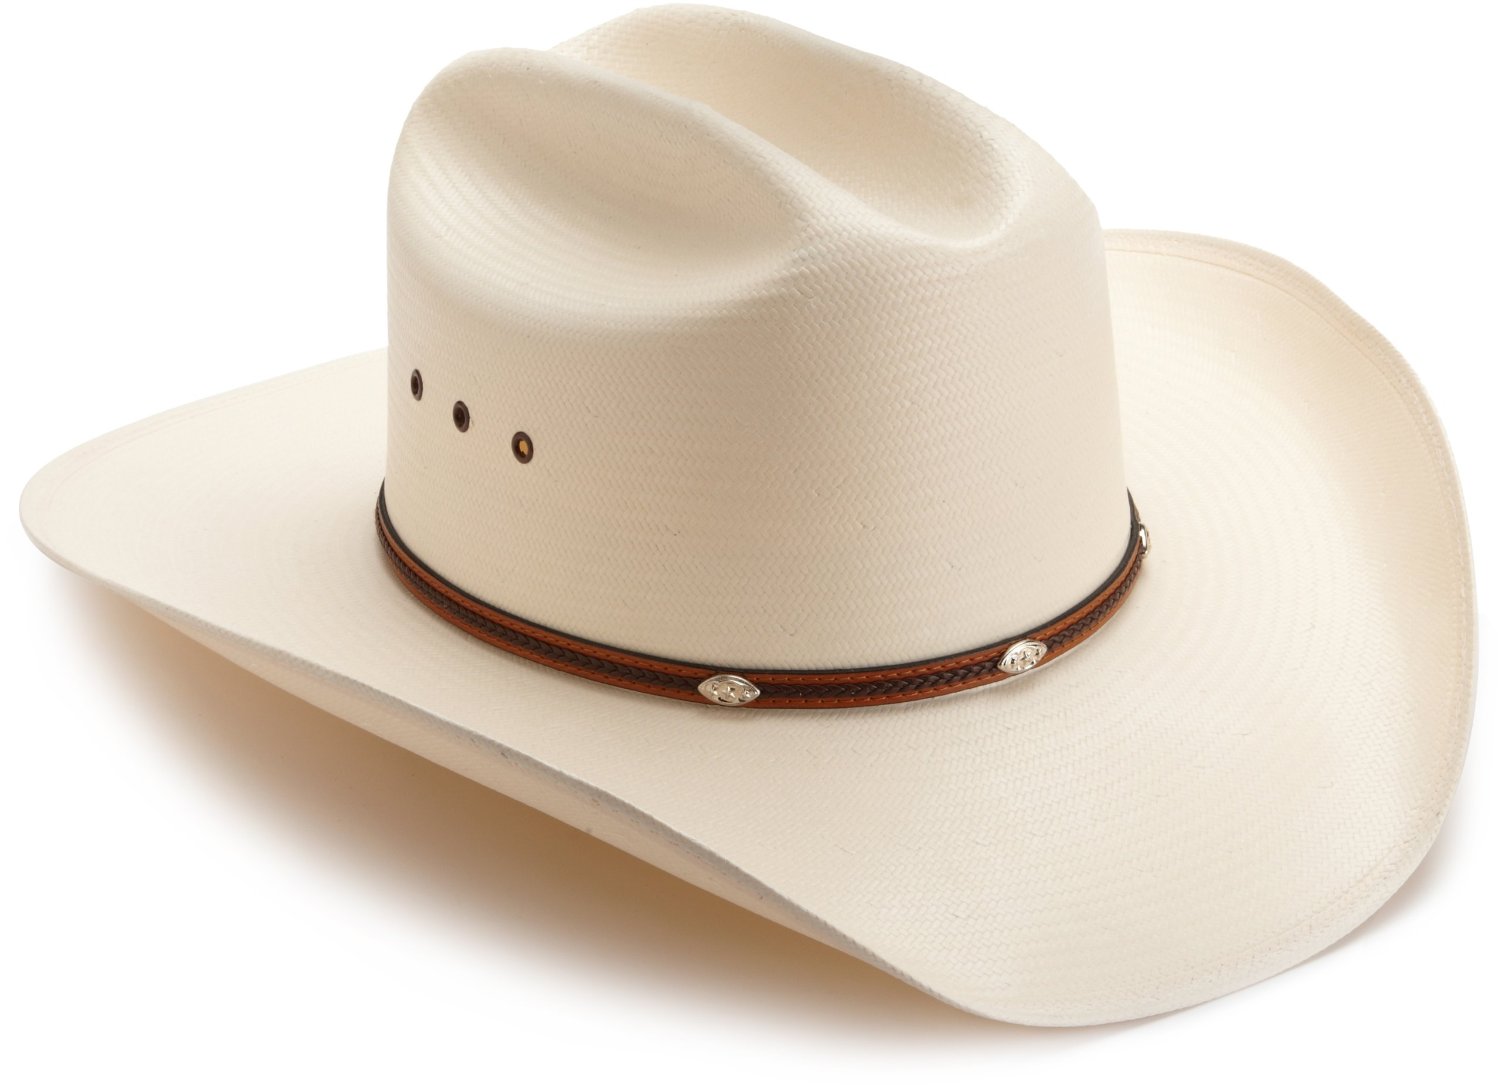 Do you own a cowboy hat?